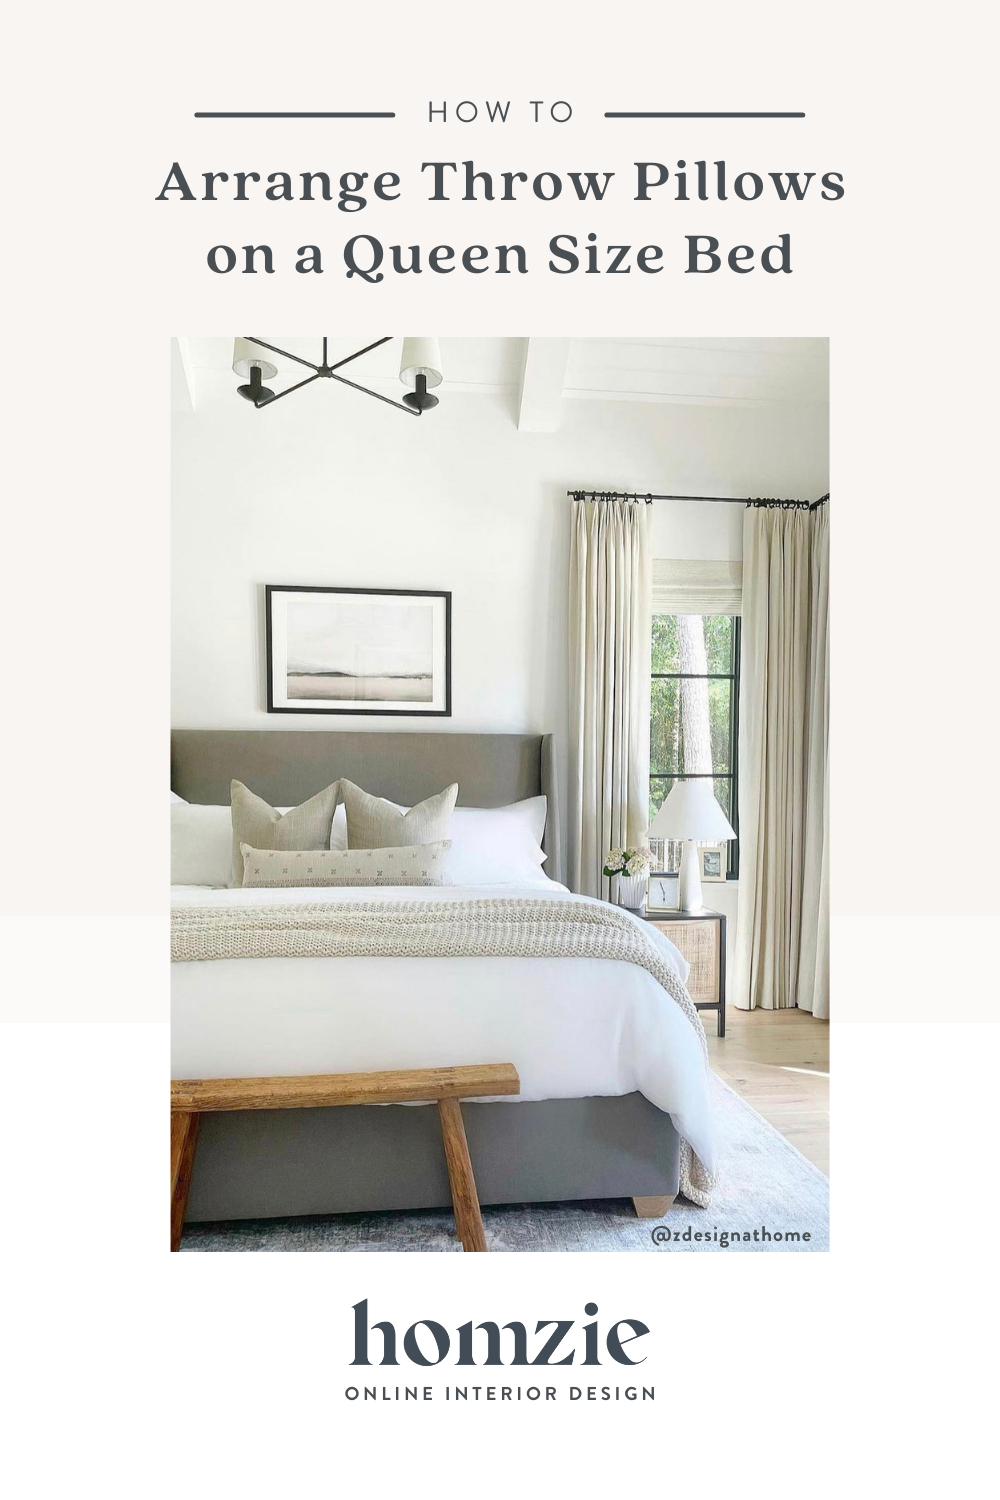 Bed Pillow Arrangements: What's Your Number?